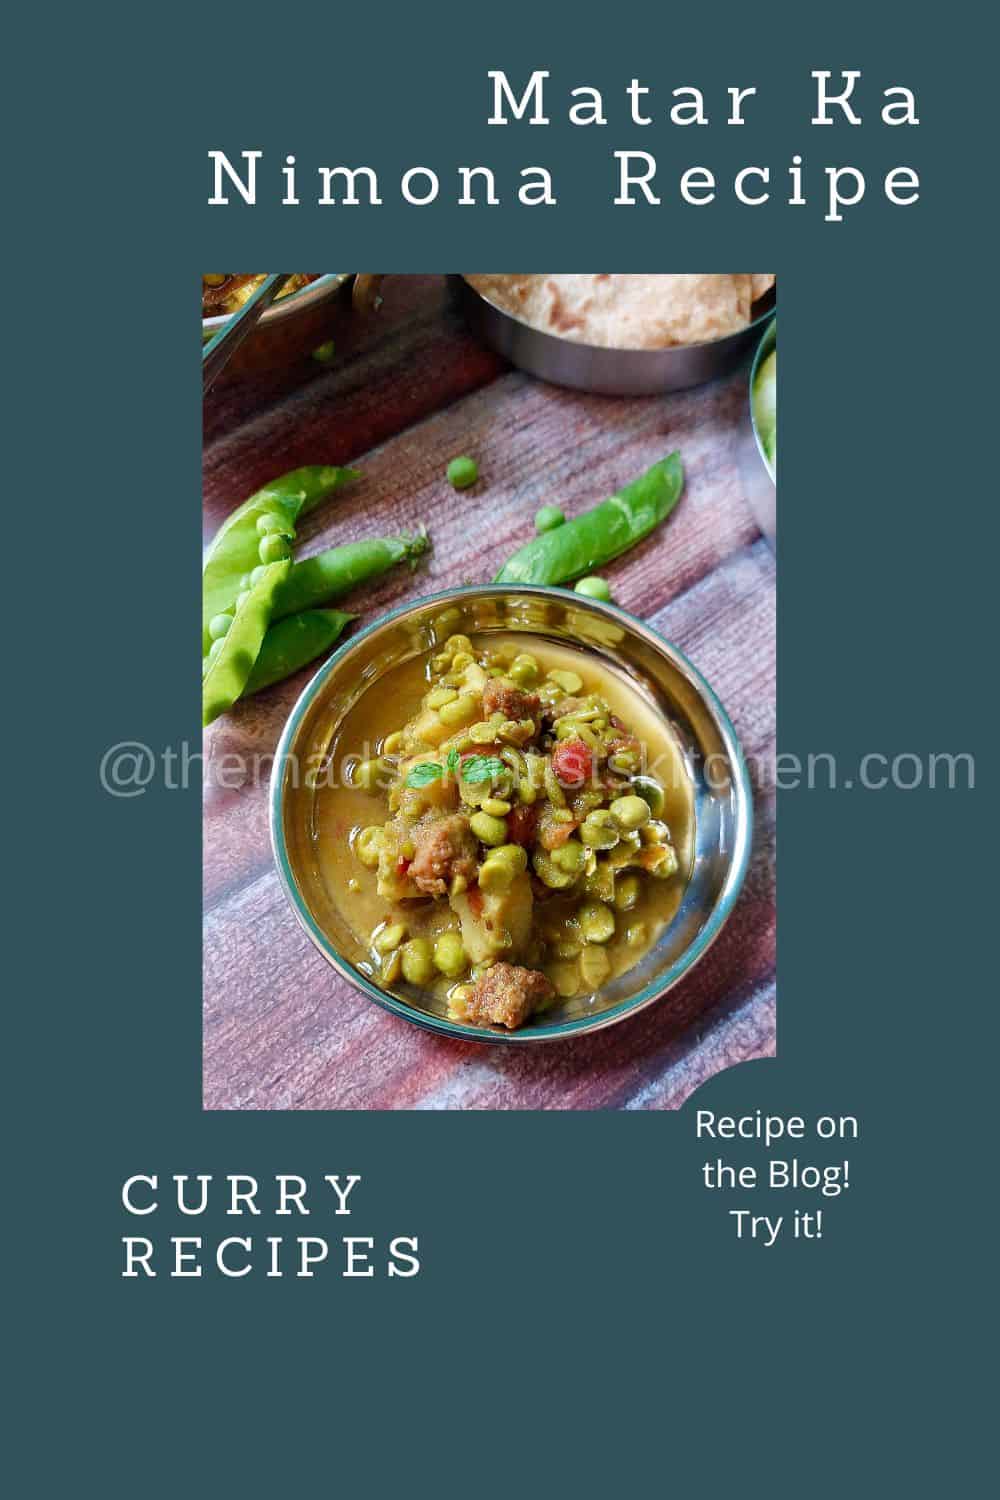 Nimona is a simple and delicious vegan curry that is made with fresh peas.